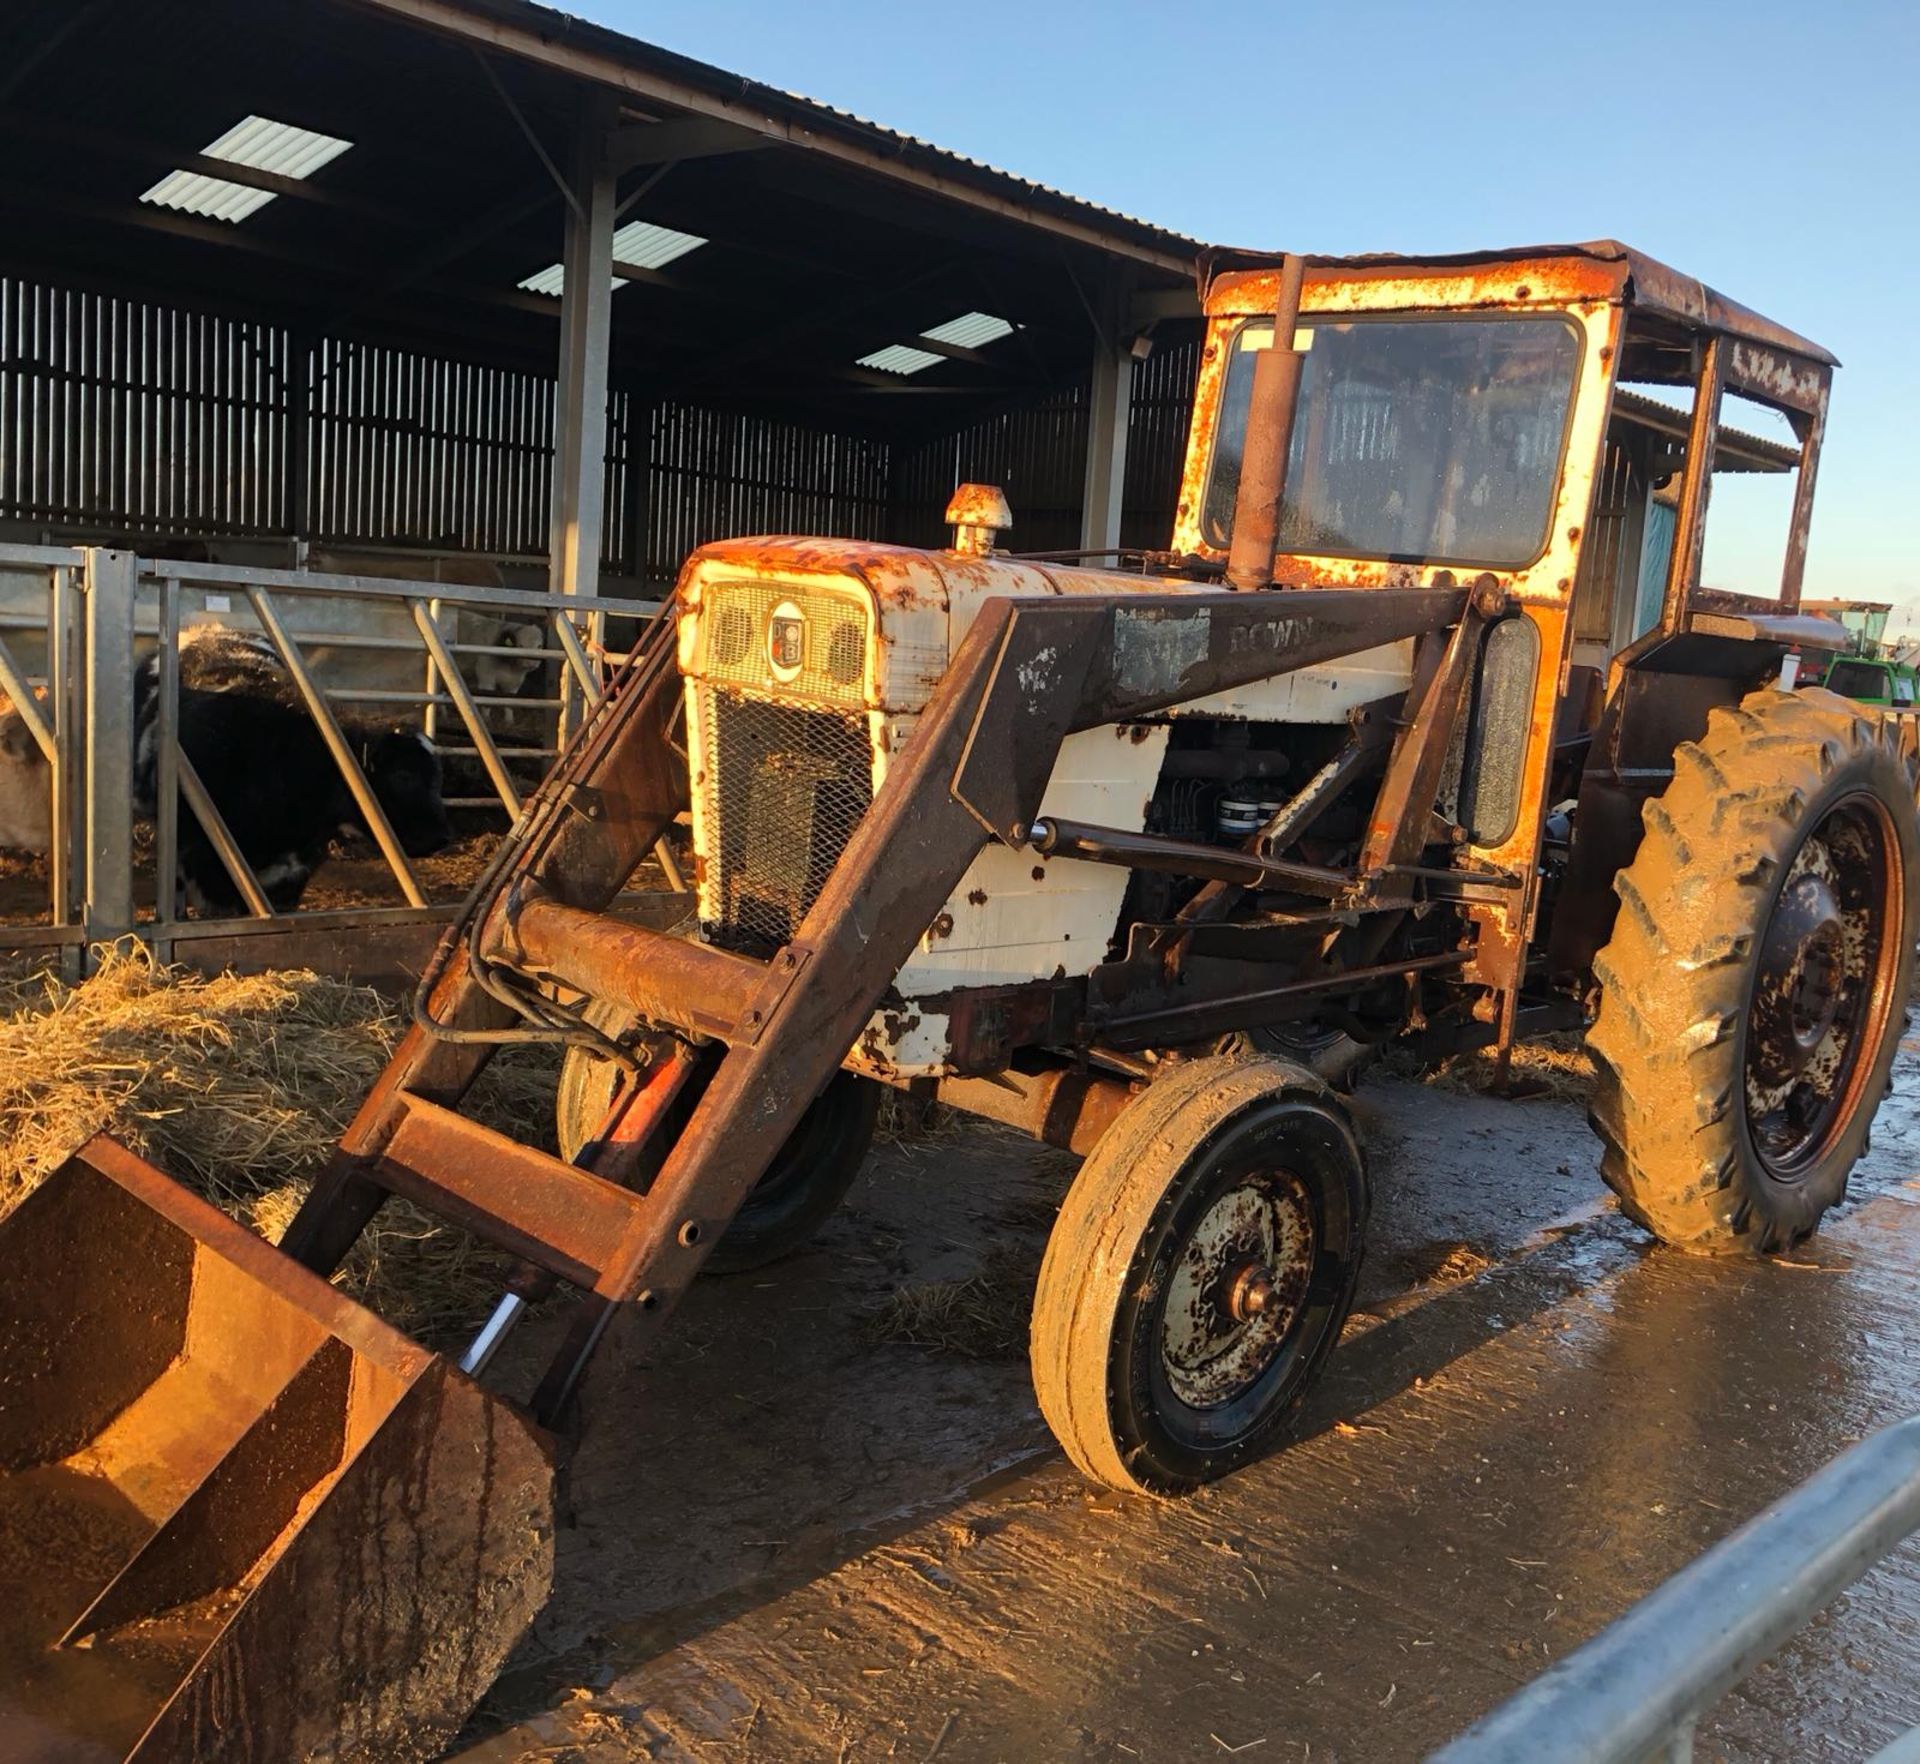 1971 DAVID BROWN 1200 TRACTOR, STARTS WITH A JUMP PACK, DRIVES AND LIFTS *PLUS VAT* - Bild 4 aus 16